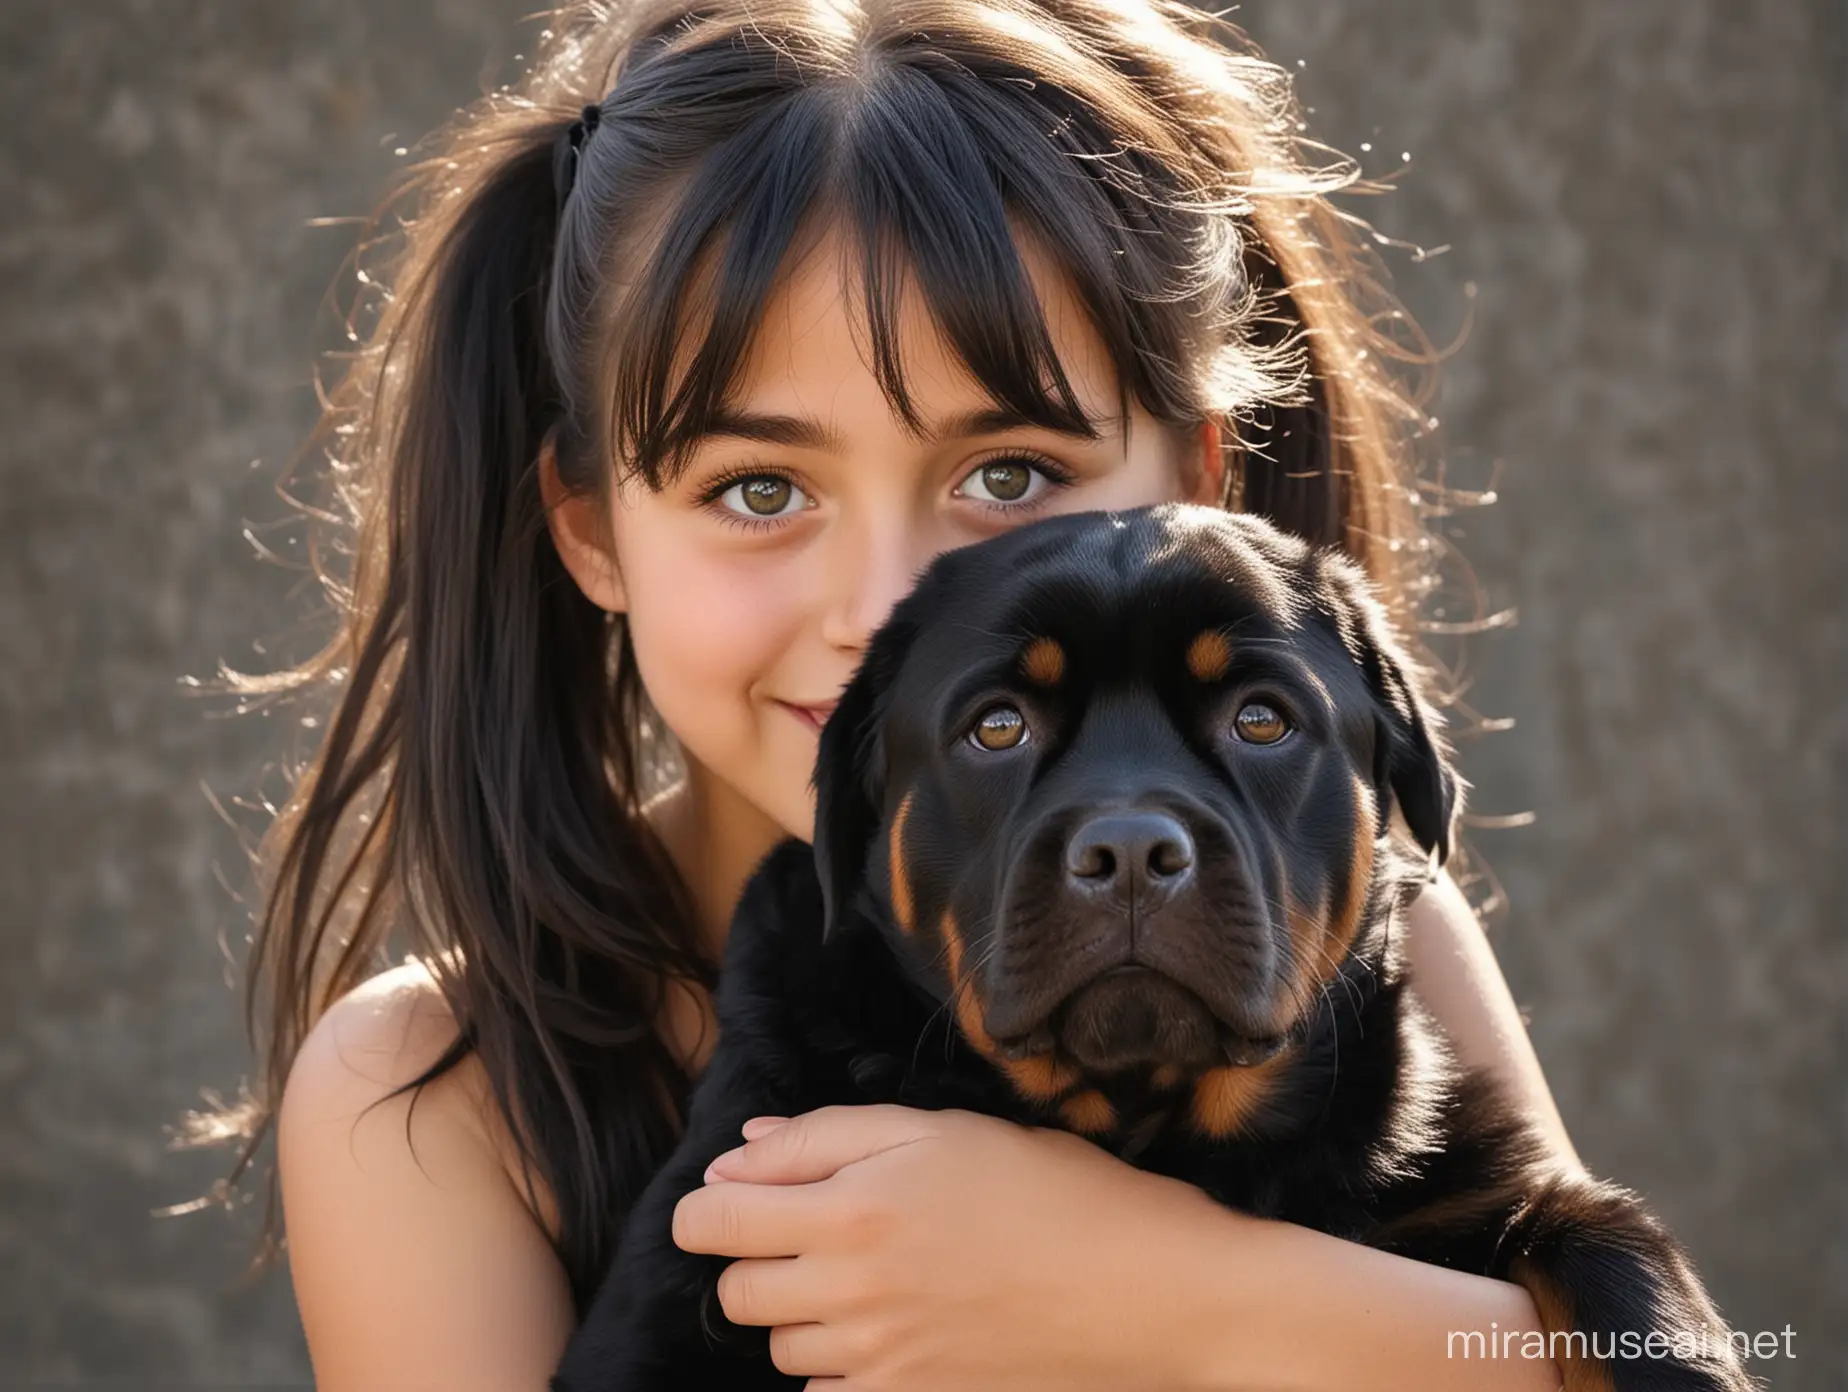 Young Woman with Long Black Hair Playing with a Rottweiler